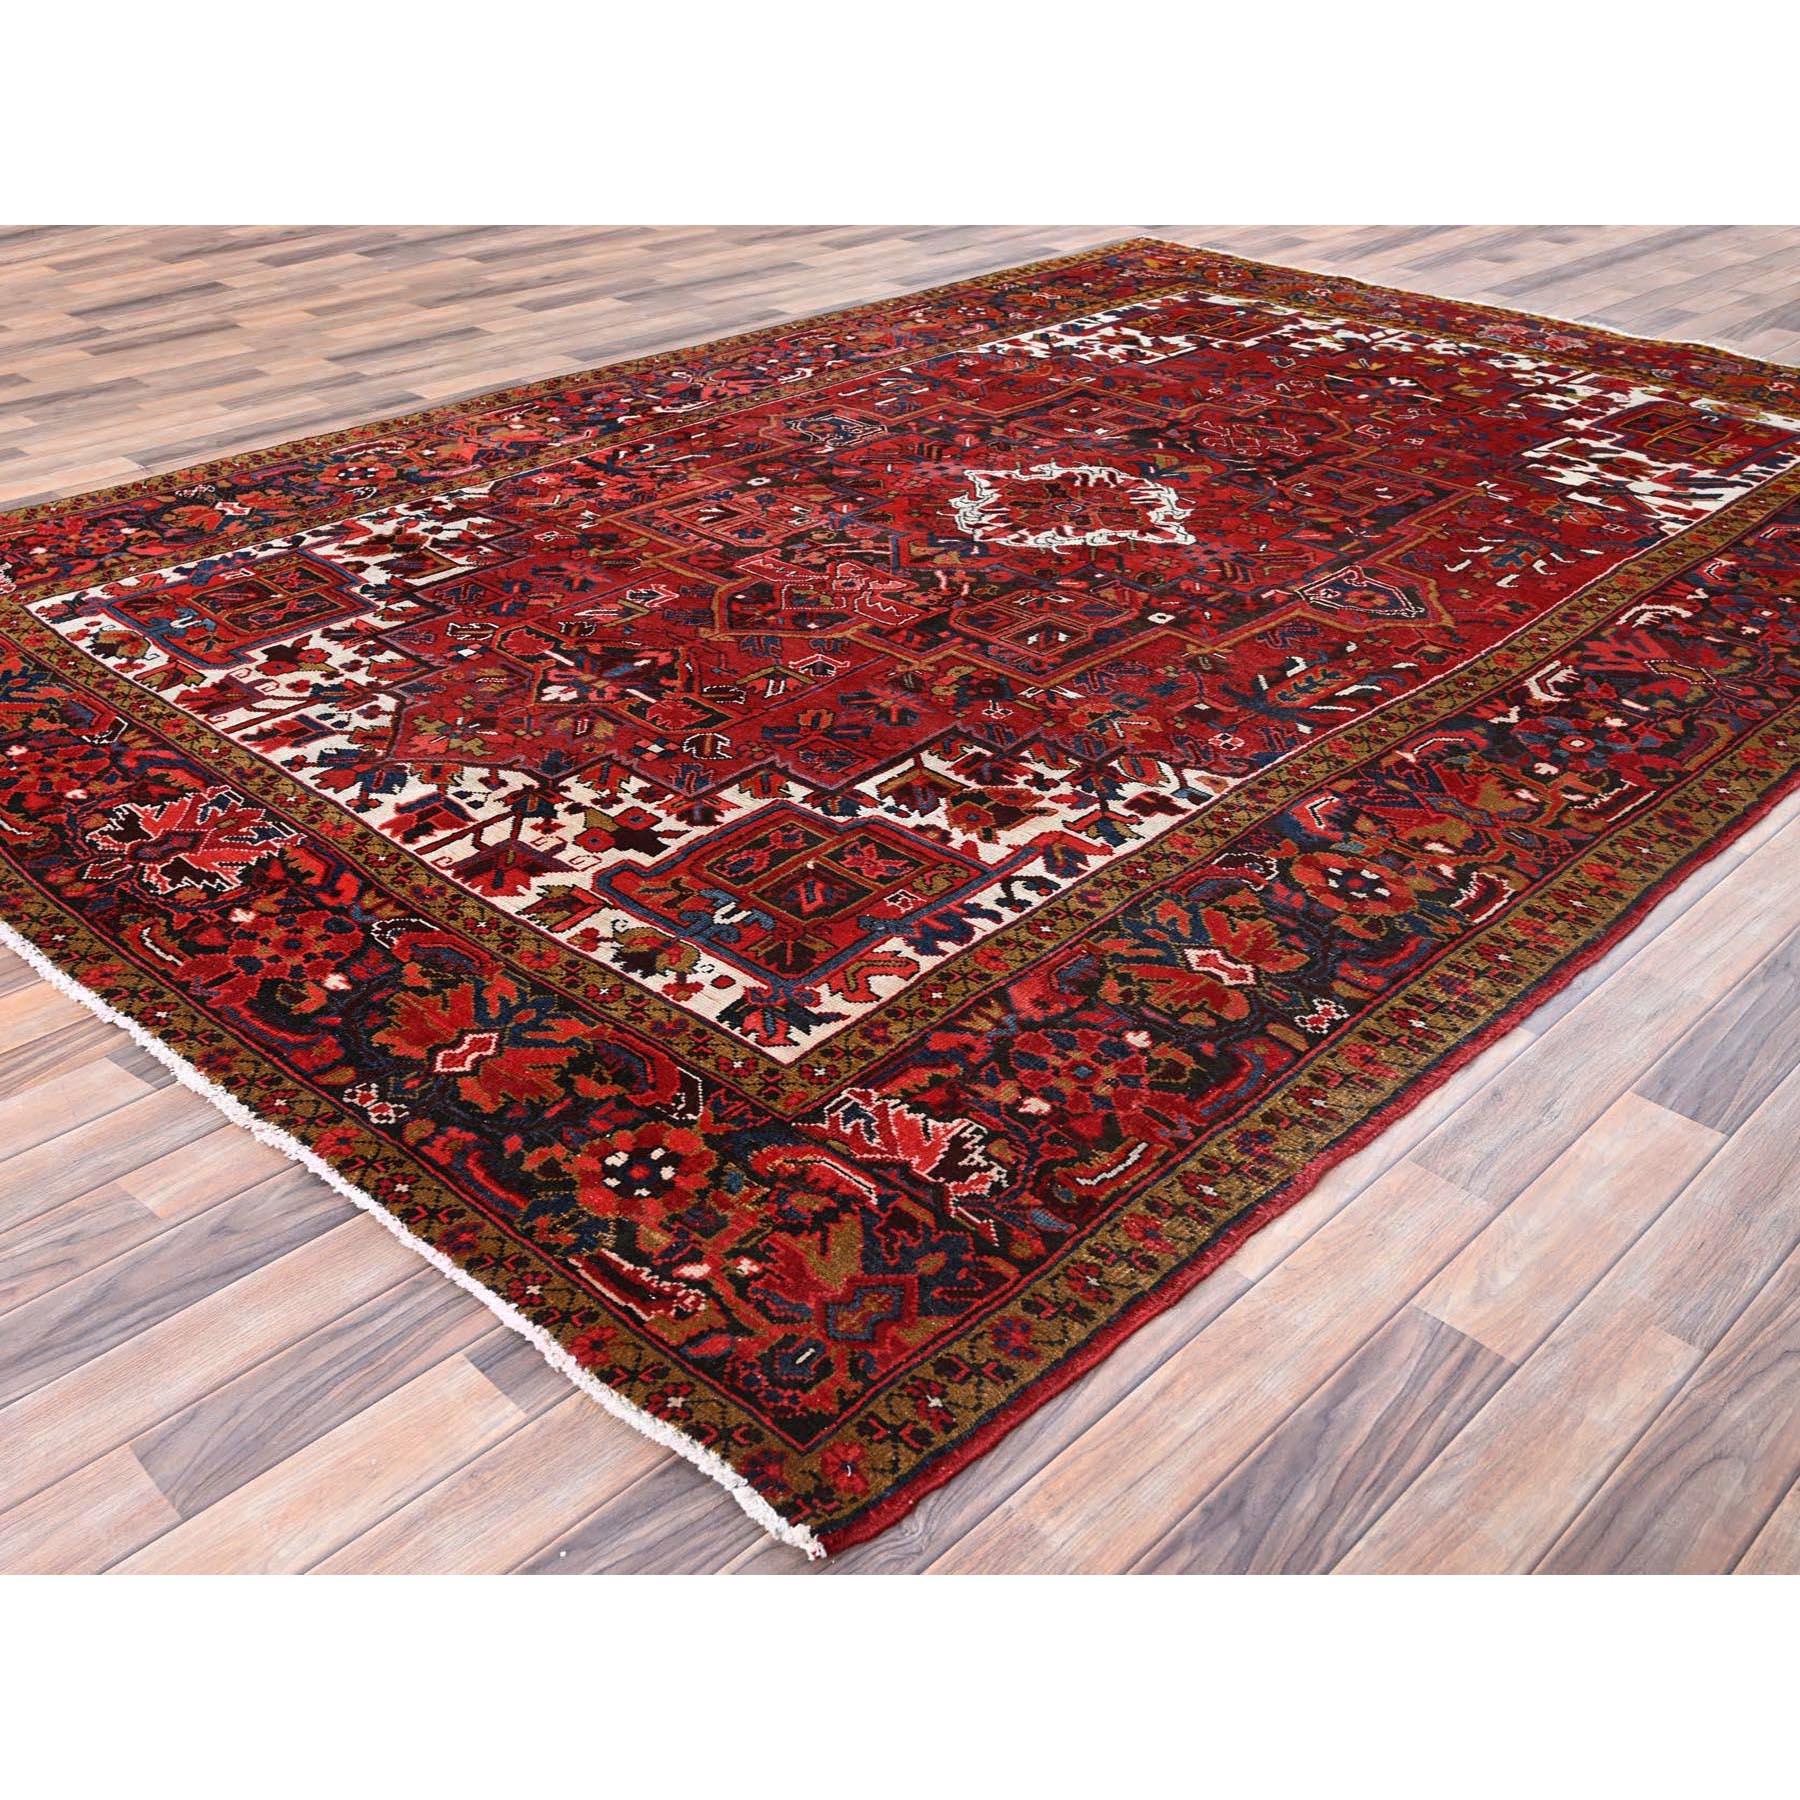 Barn Red Vintage Persian Heriz Good Cond Rustic Look Worn Wool Hand Knotted Rug In Good Condition For Sale In Carlstadt, NJ